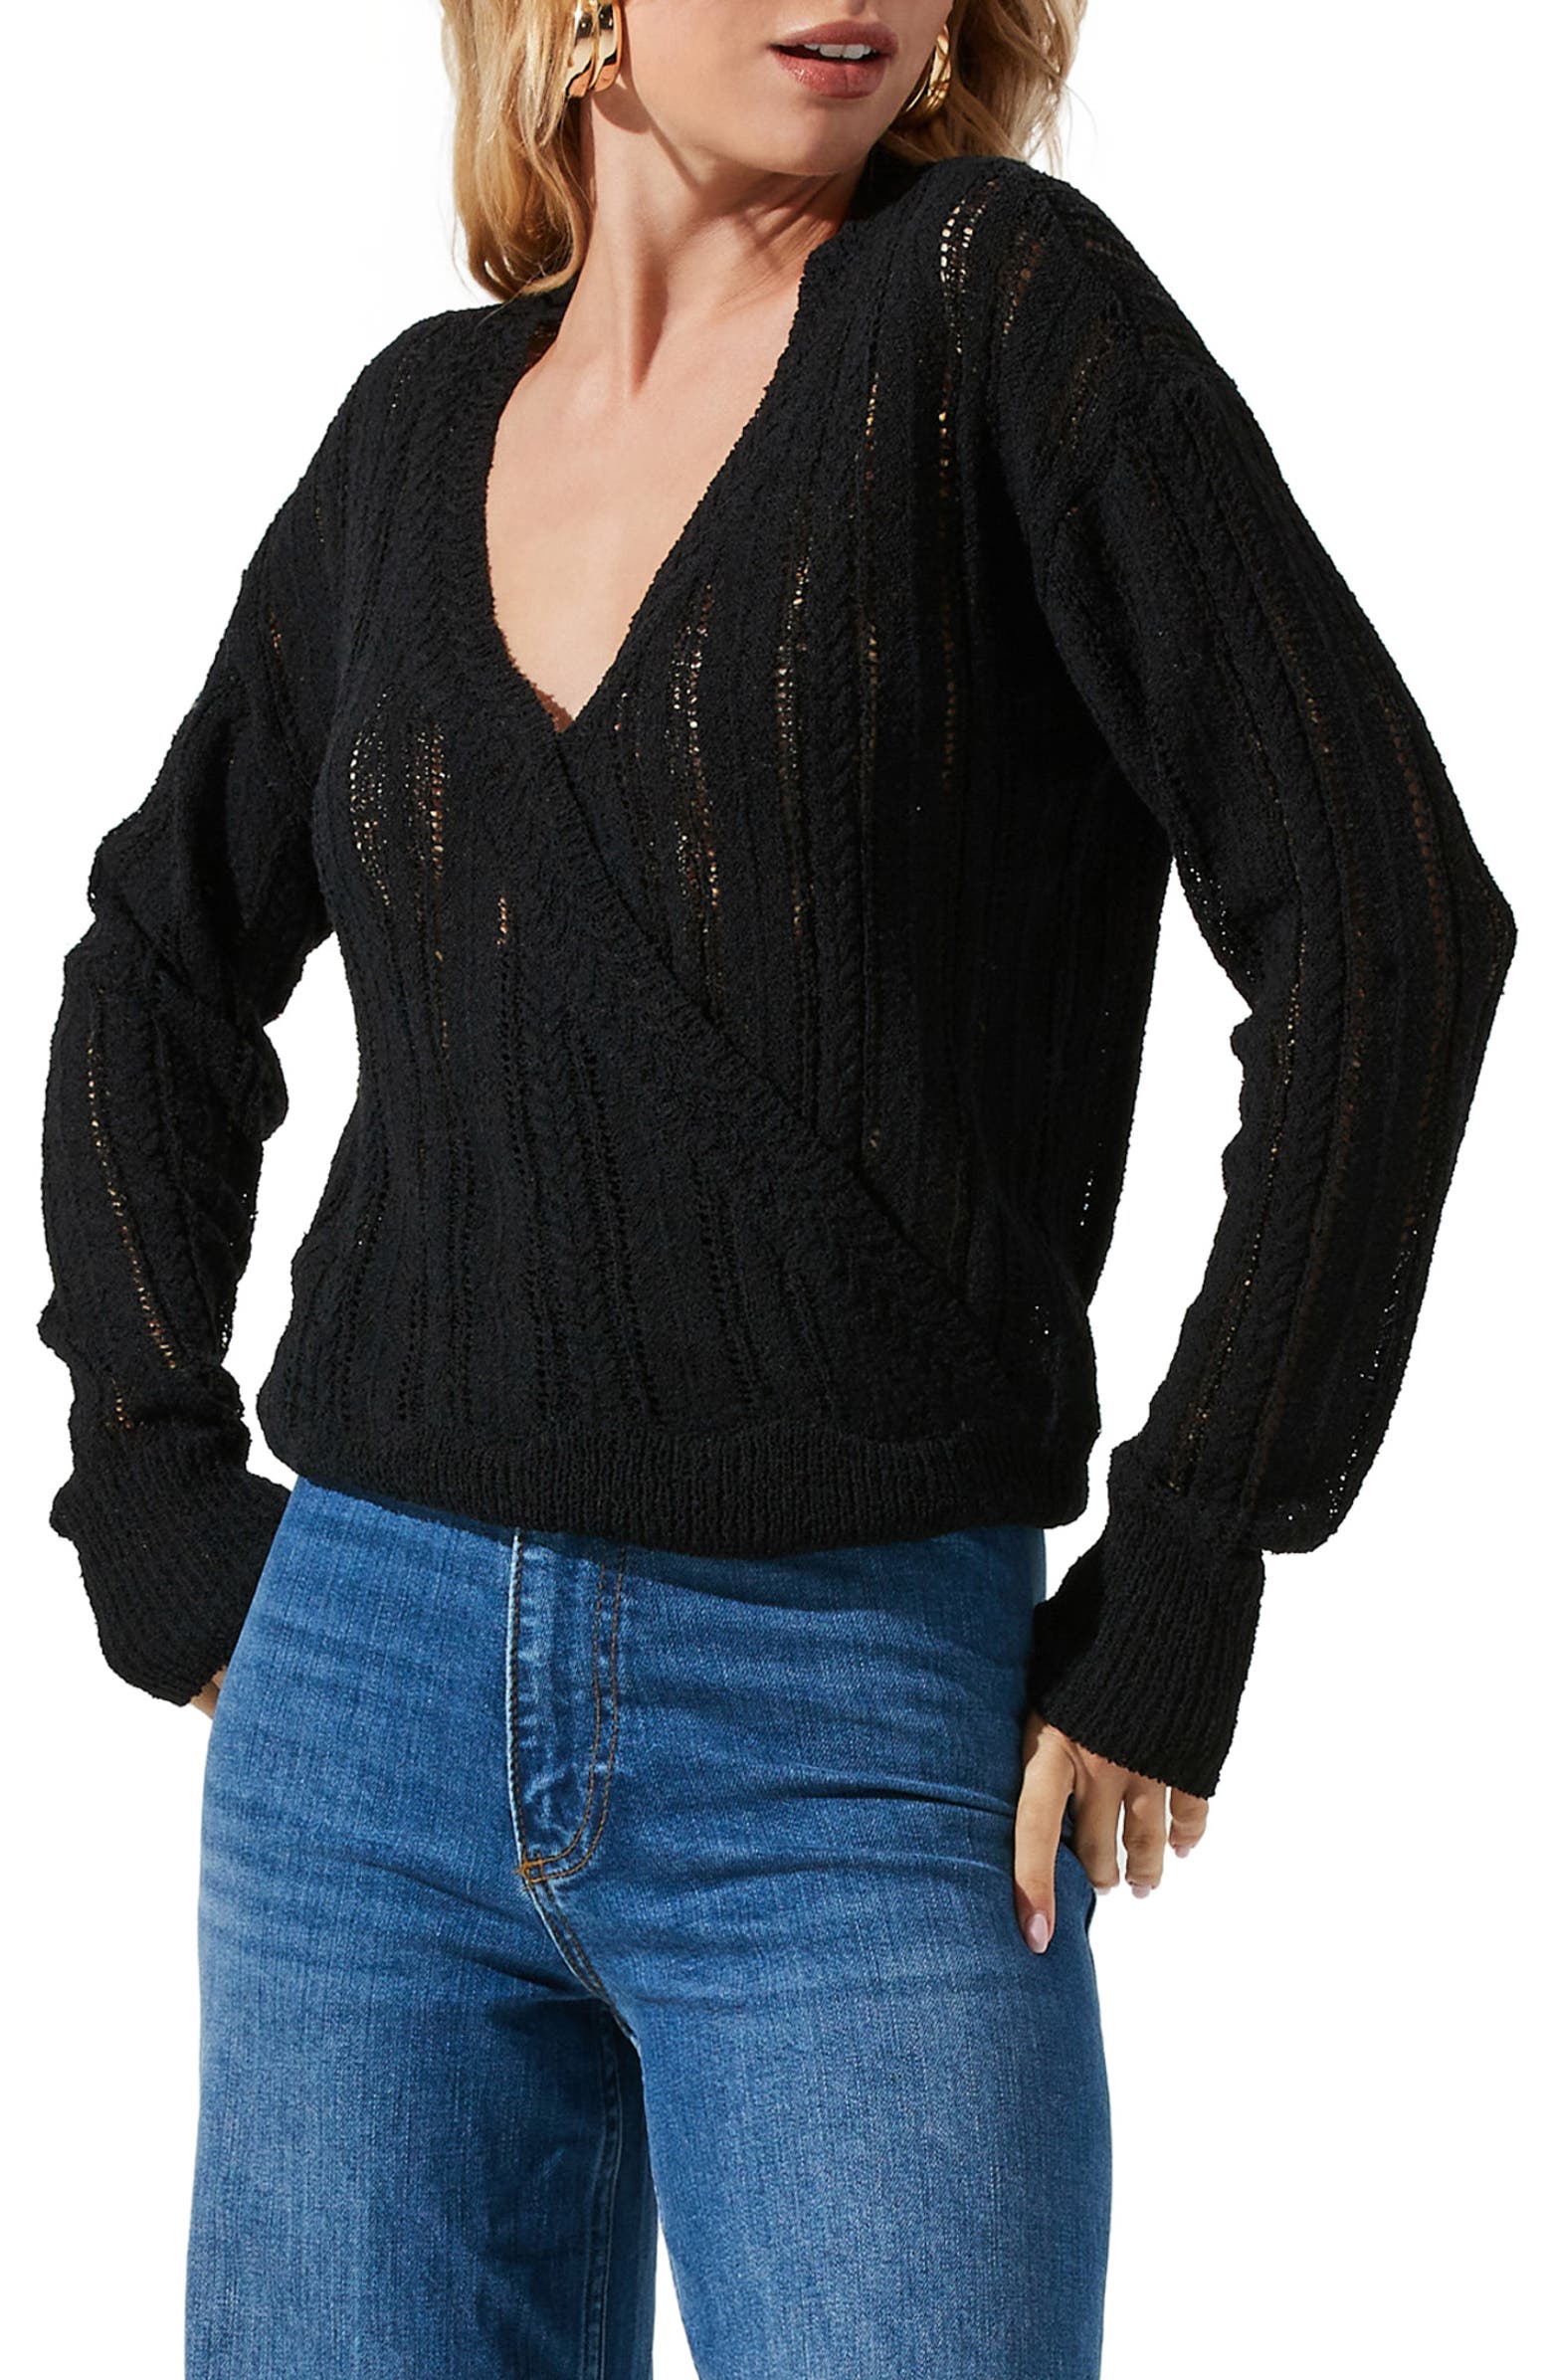 Wrap Front Pointelle Sweater on Sale At Nordstrom Rack